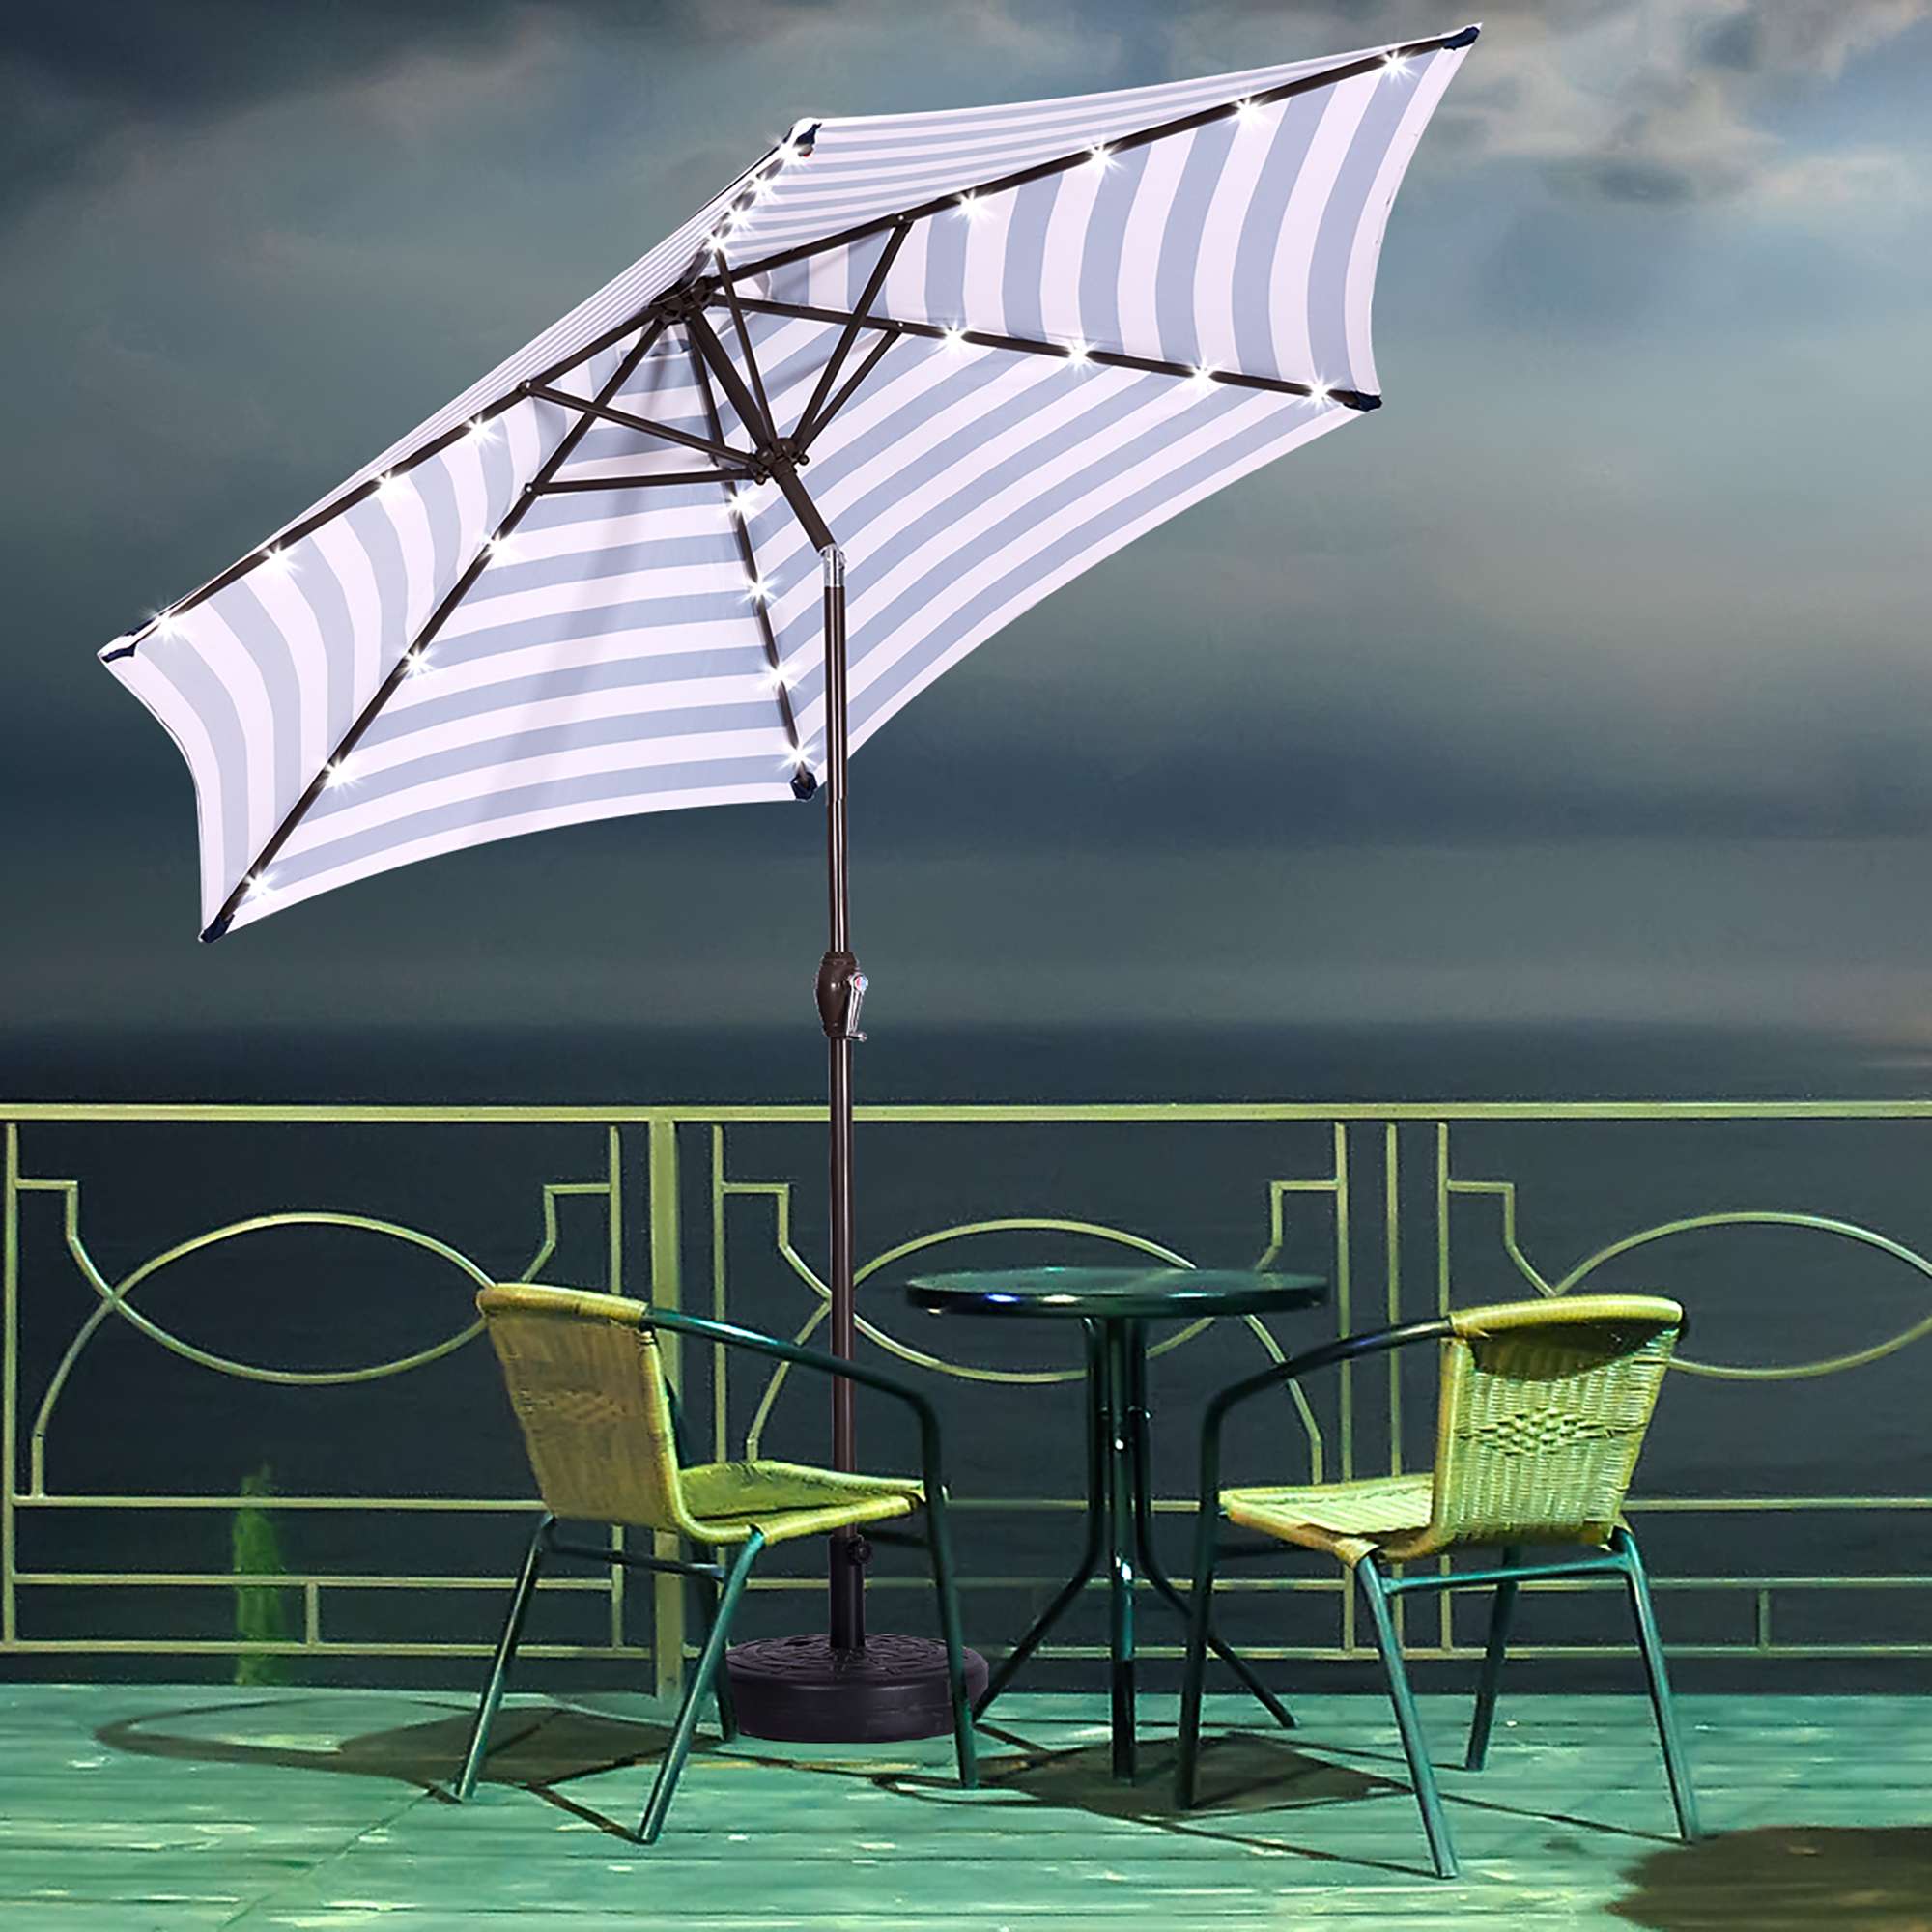 [KGORGE Plus]8.7 Ft Outdoor Patio Market Table Umbrella with Push Button Tilt and Crank With 24 LED Lights[Umbrella Base is not Included]